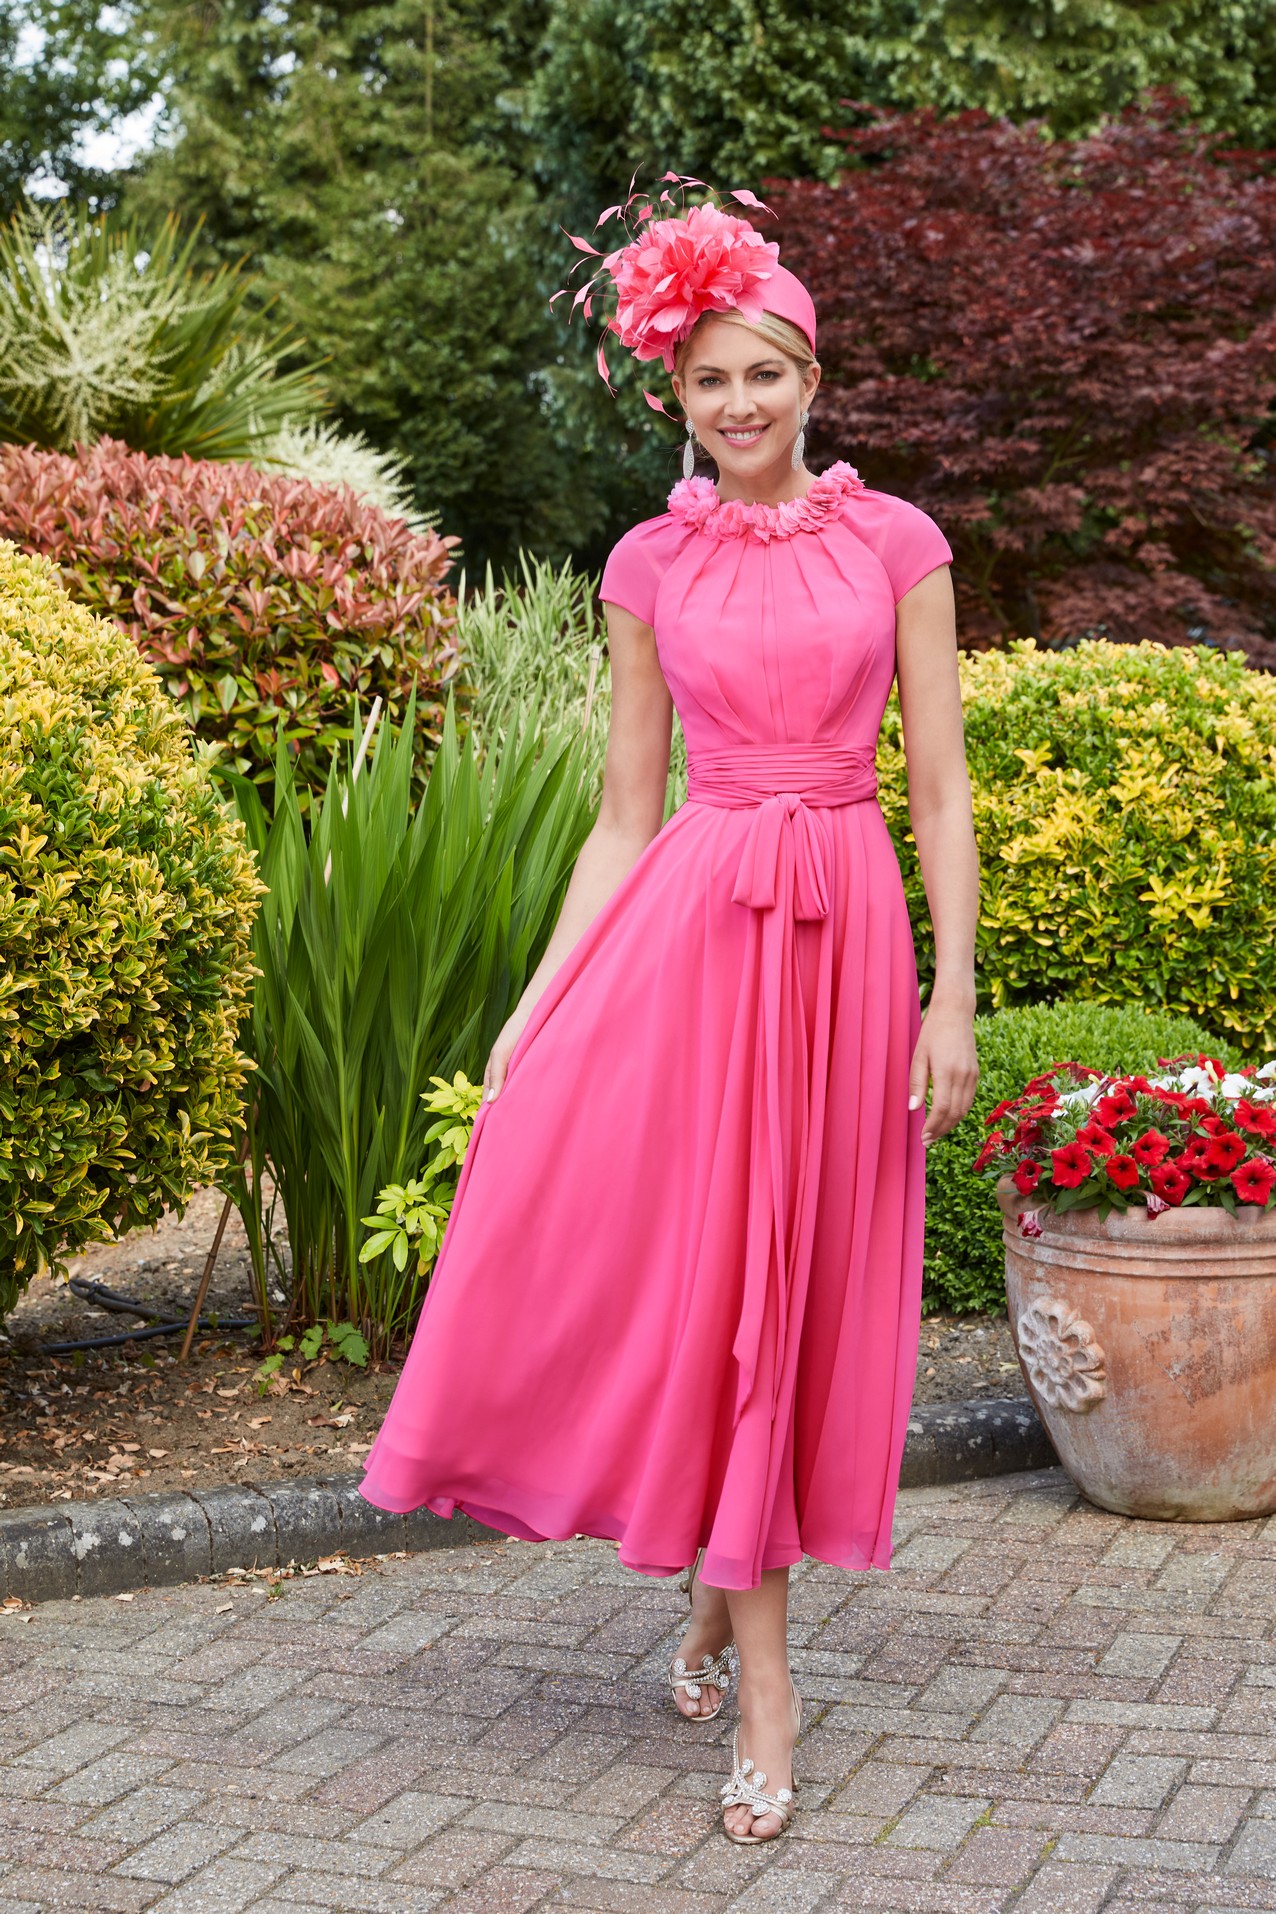 Lady in garden wearing vibrant pink a-line dress with 3d floral neckline, gathered waist detail and cap sleeves with matching occasion headwear piece